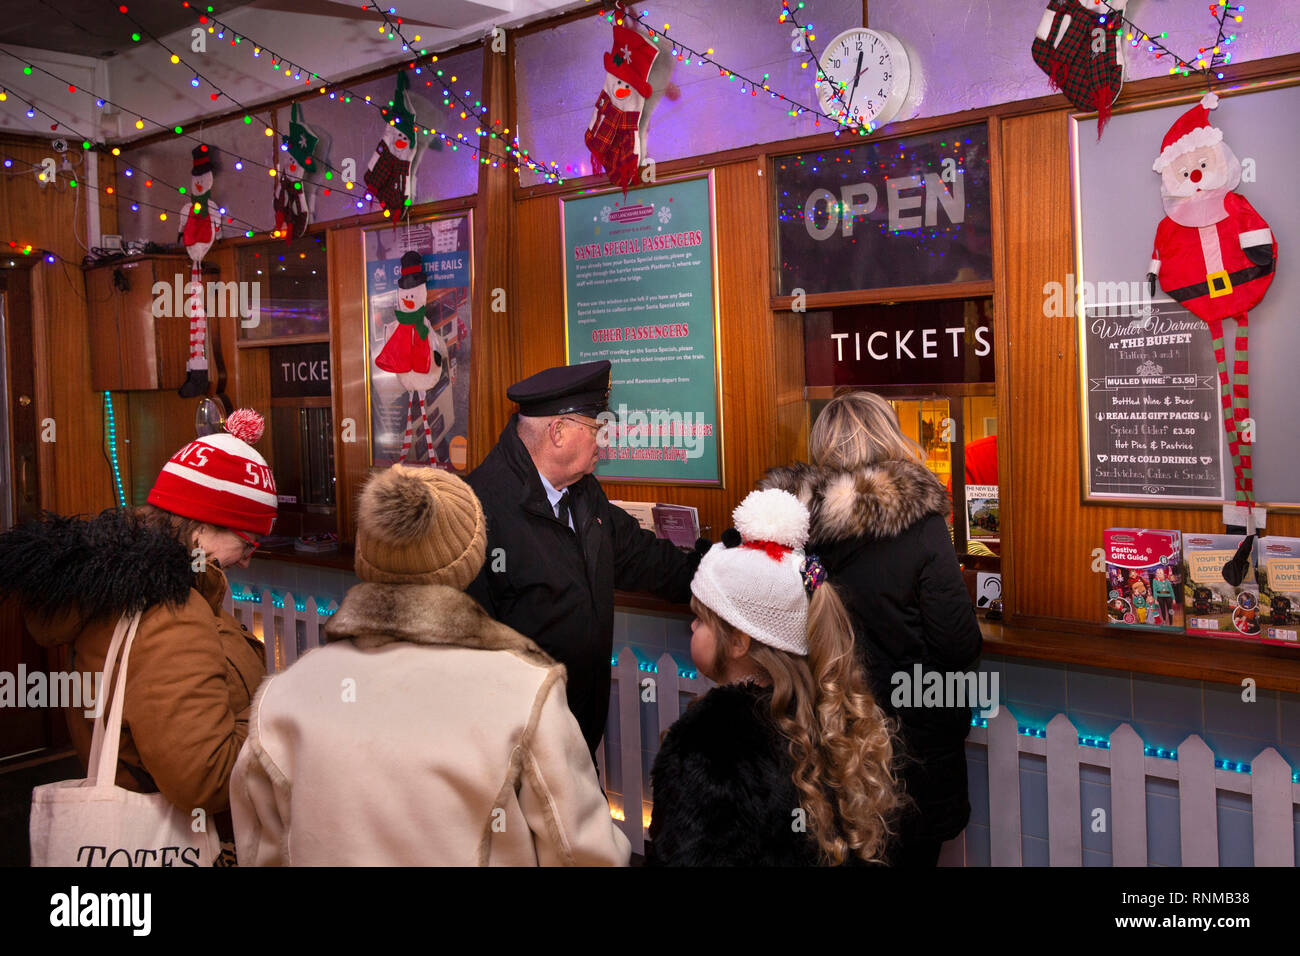 UK, England, Lancashire, Bury, Bolton Street Station of East Lancashire Railway, ticket booth at Christmas for Santa Special trains Stock Photo